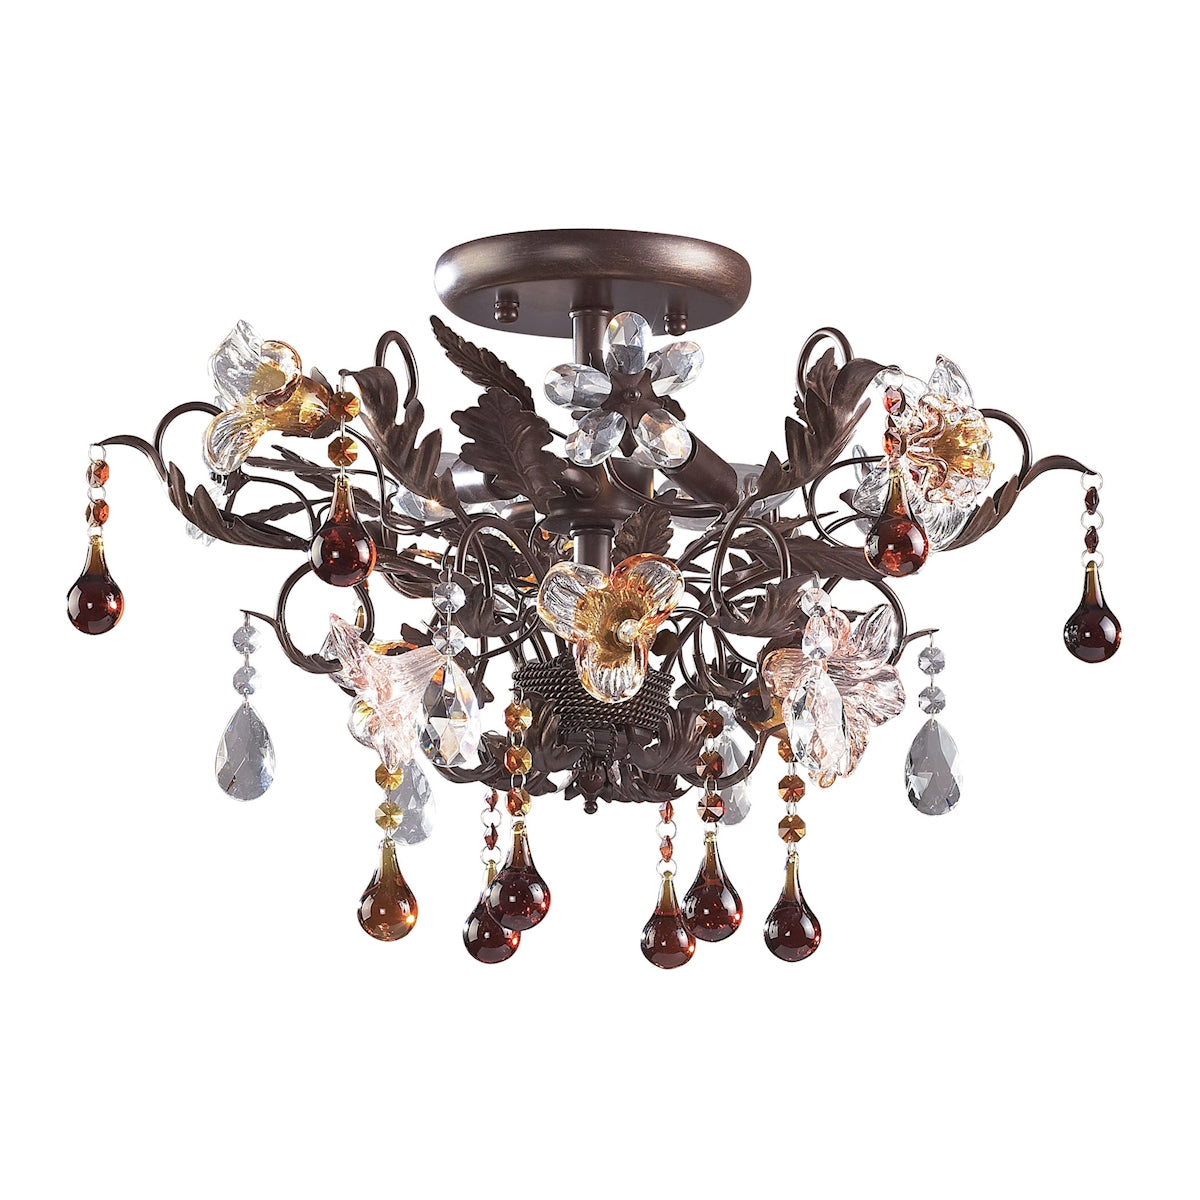 ELK Lighting 1878869 - Cristallo Fiore 19" Wide 3-Light Semi Flush in Deep Rust with Clear and Amber